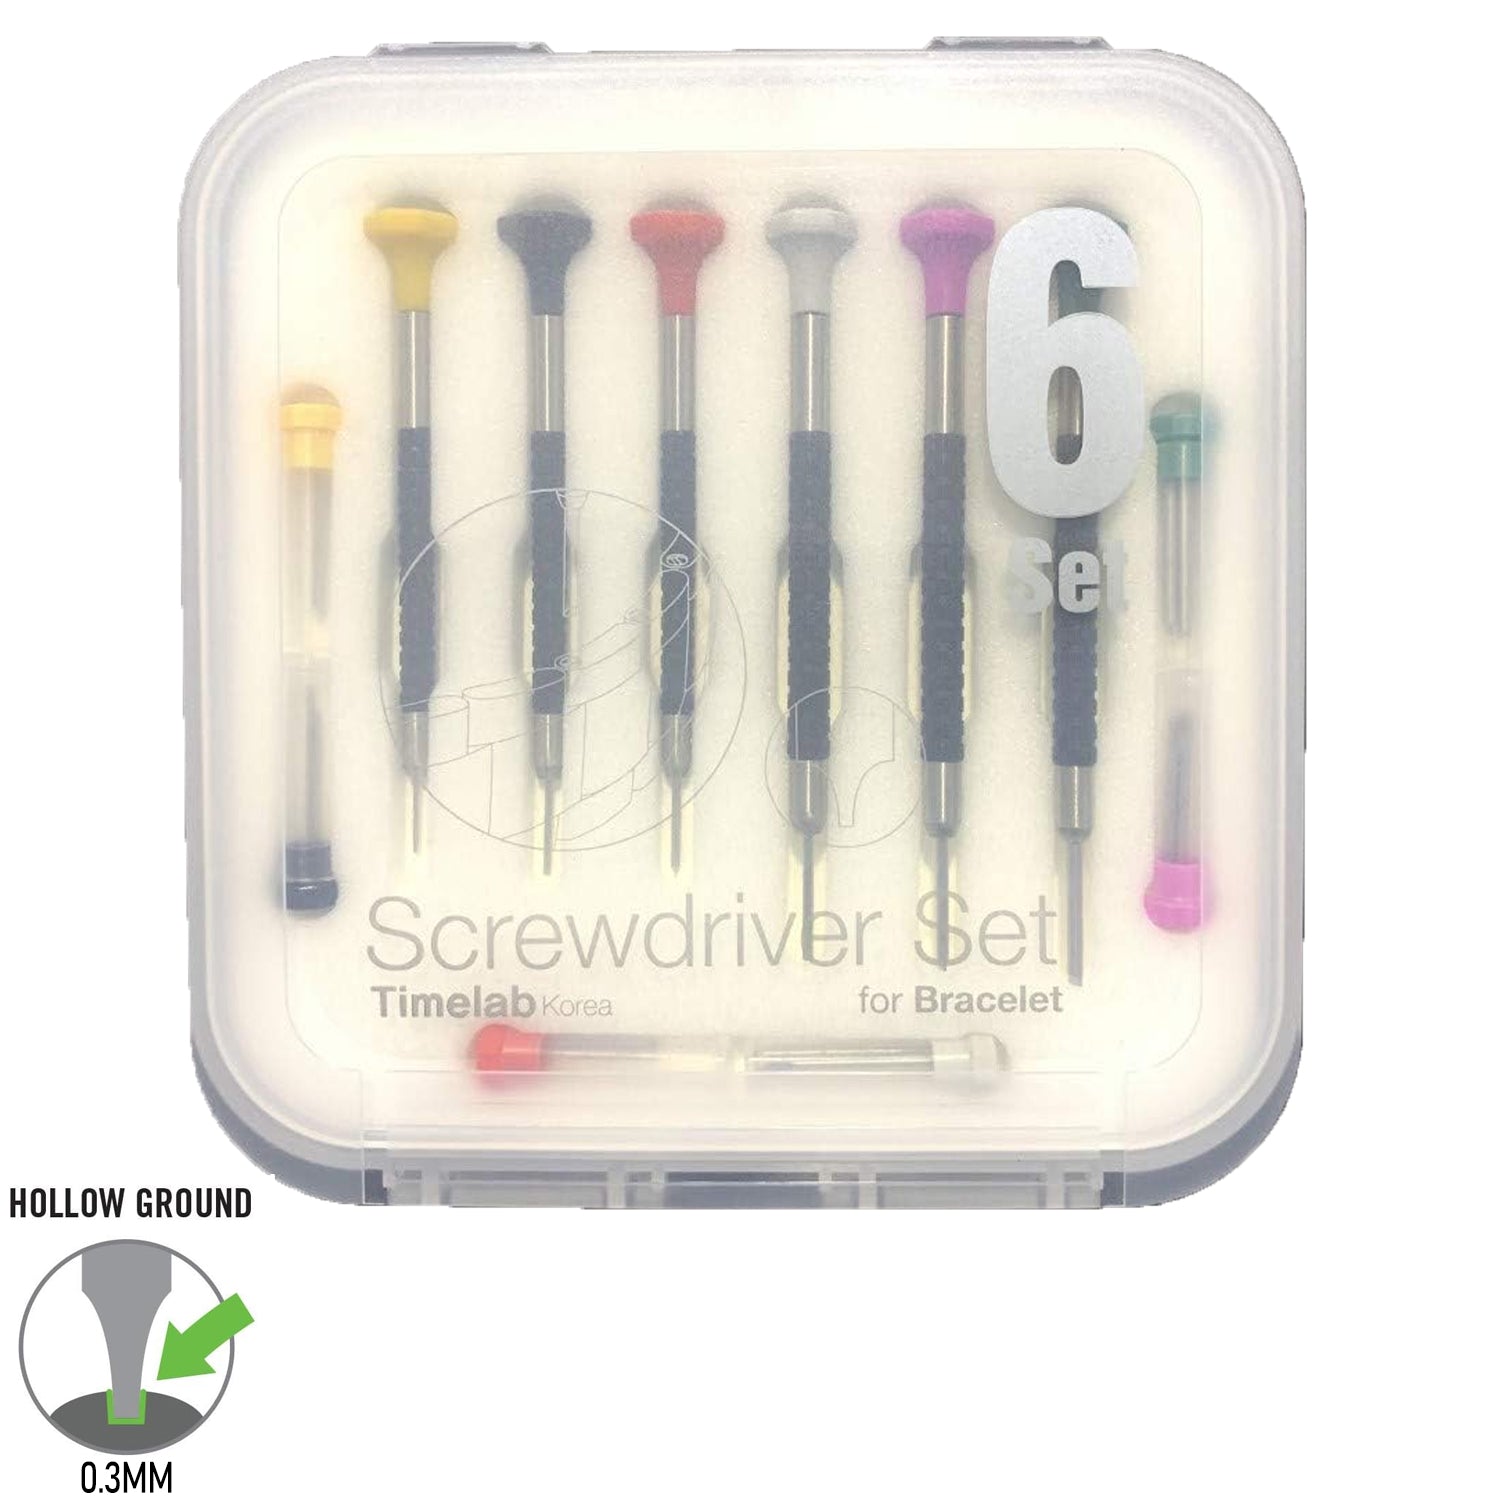 SD-570, Set of 6 Hallow Ground "T" Tip Screwdrivers for Bracelets with Spare Blades